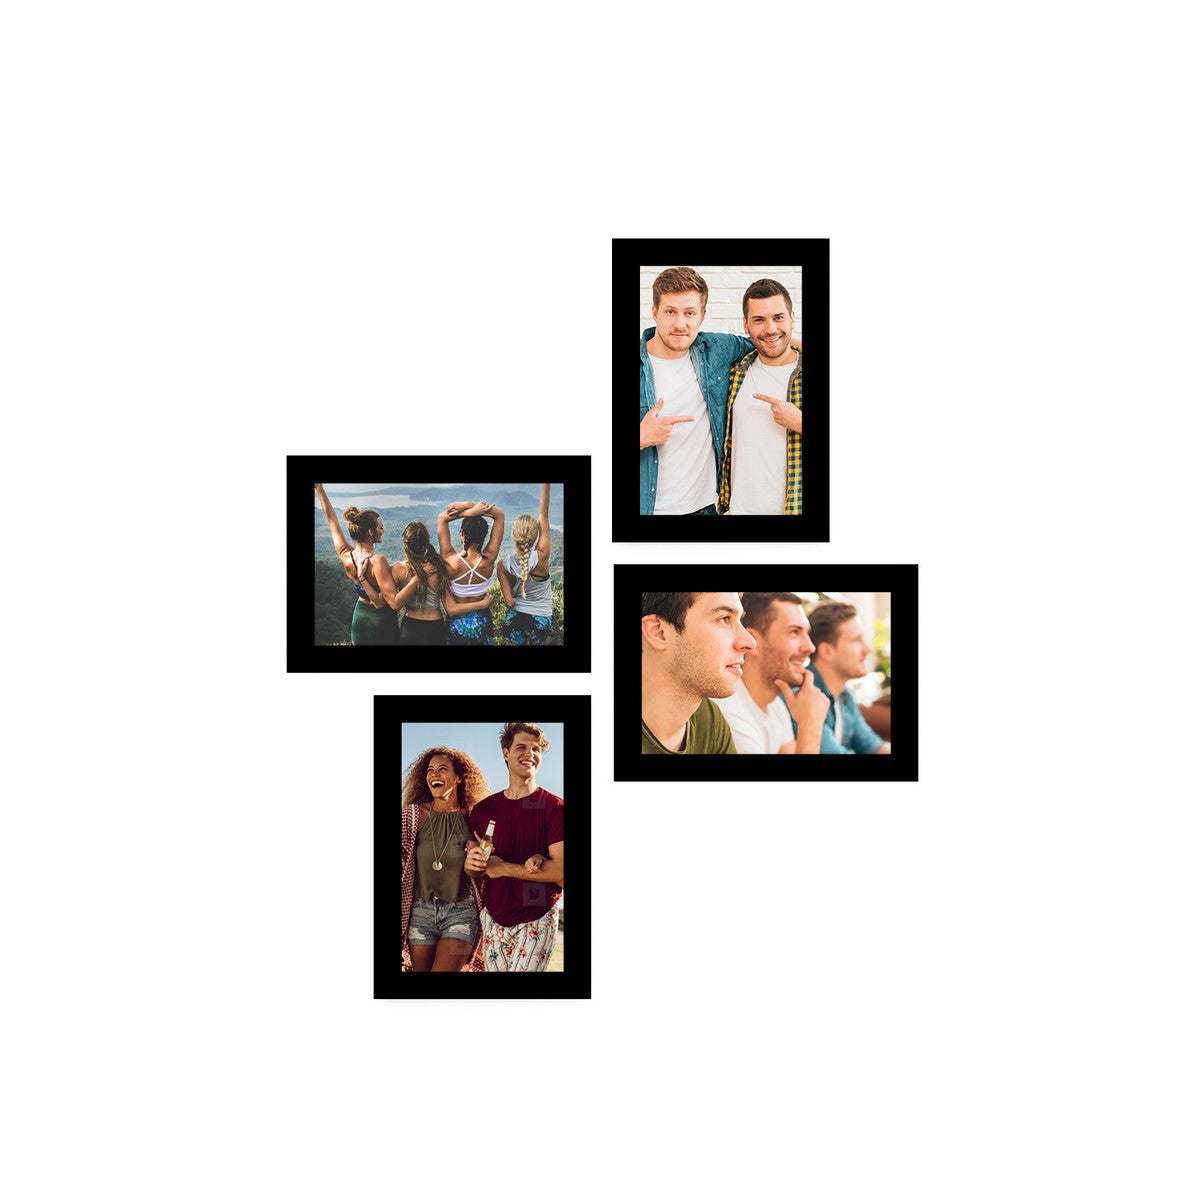 Memory Wall Collage Photo Frame - Set of 4 Photo Frames for 4 Photos of 5"x7"